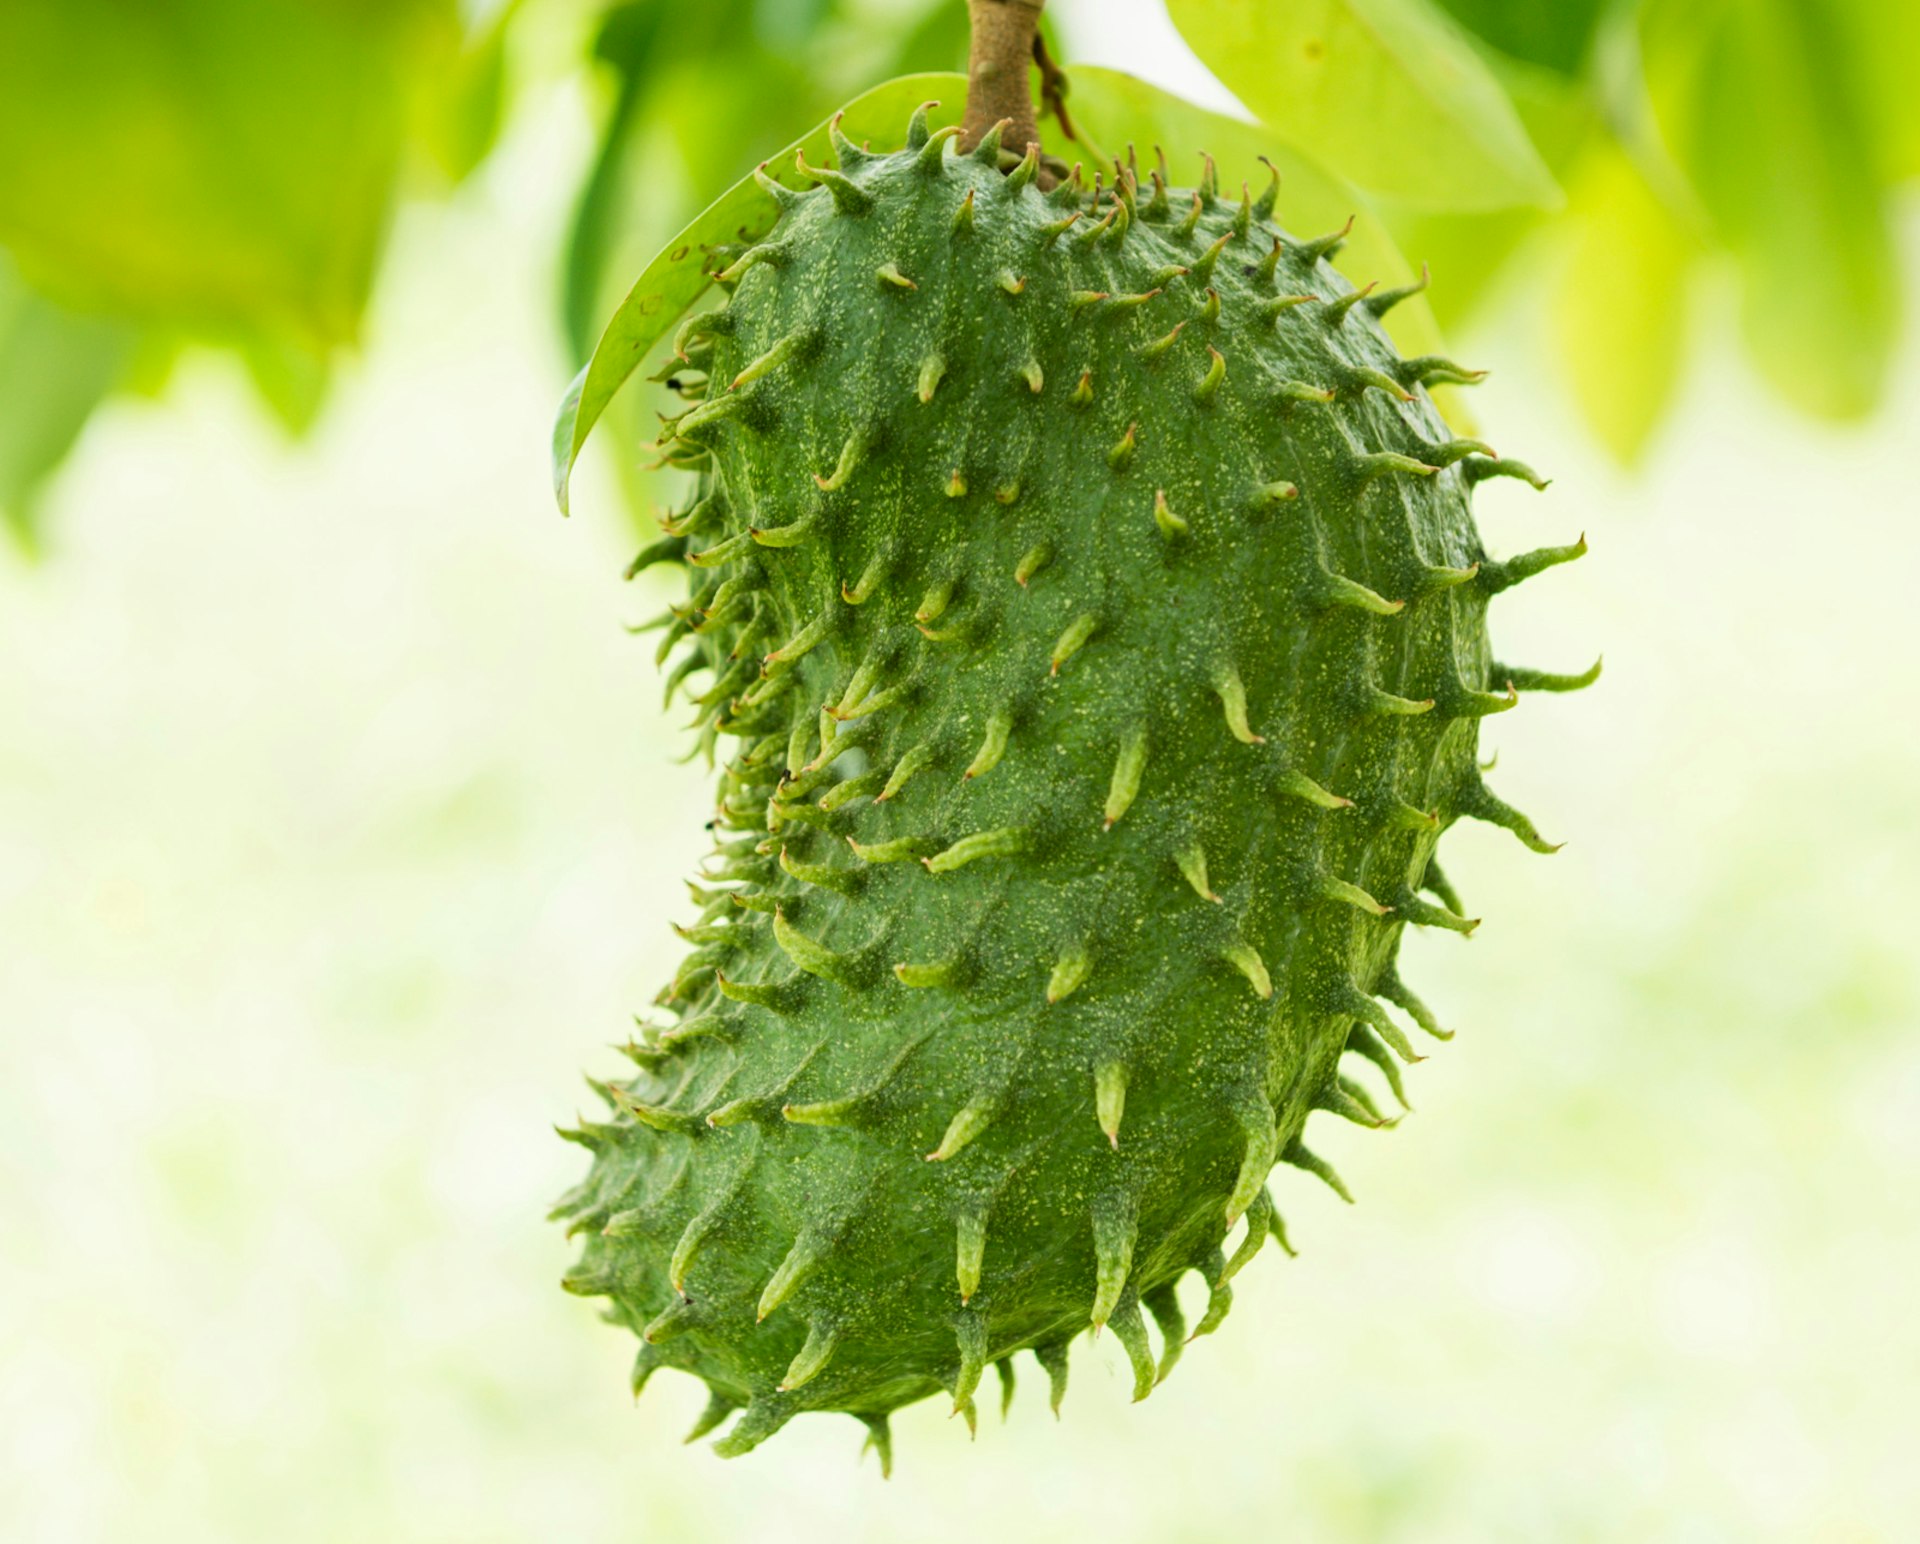 Shaped like a kidney bean, this spiky bright green fruit hangs from a tree branch © Justin Foulkes / Lonely Planet